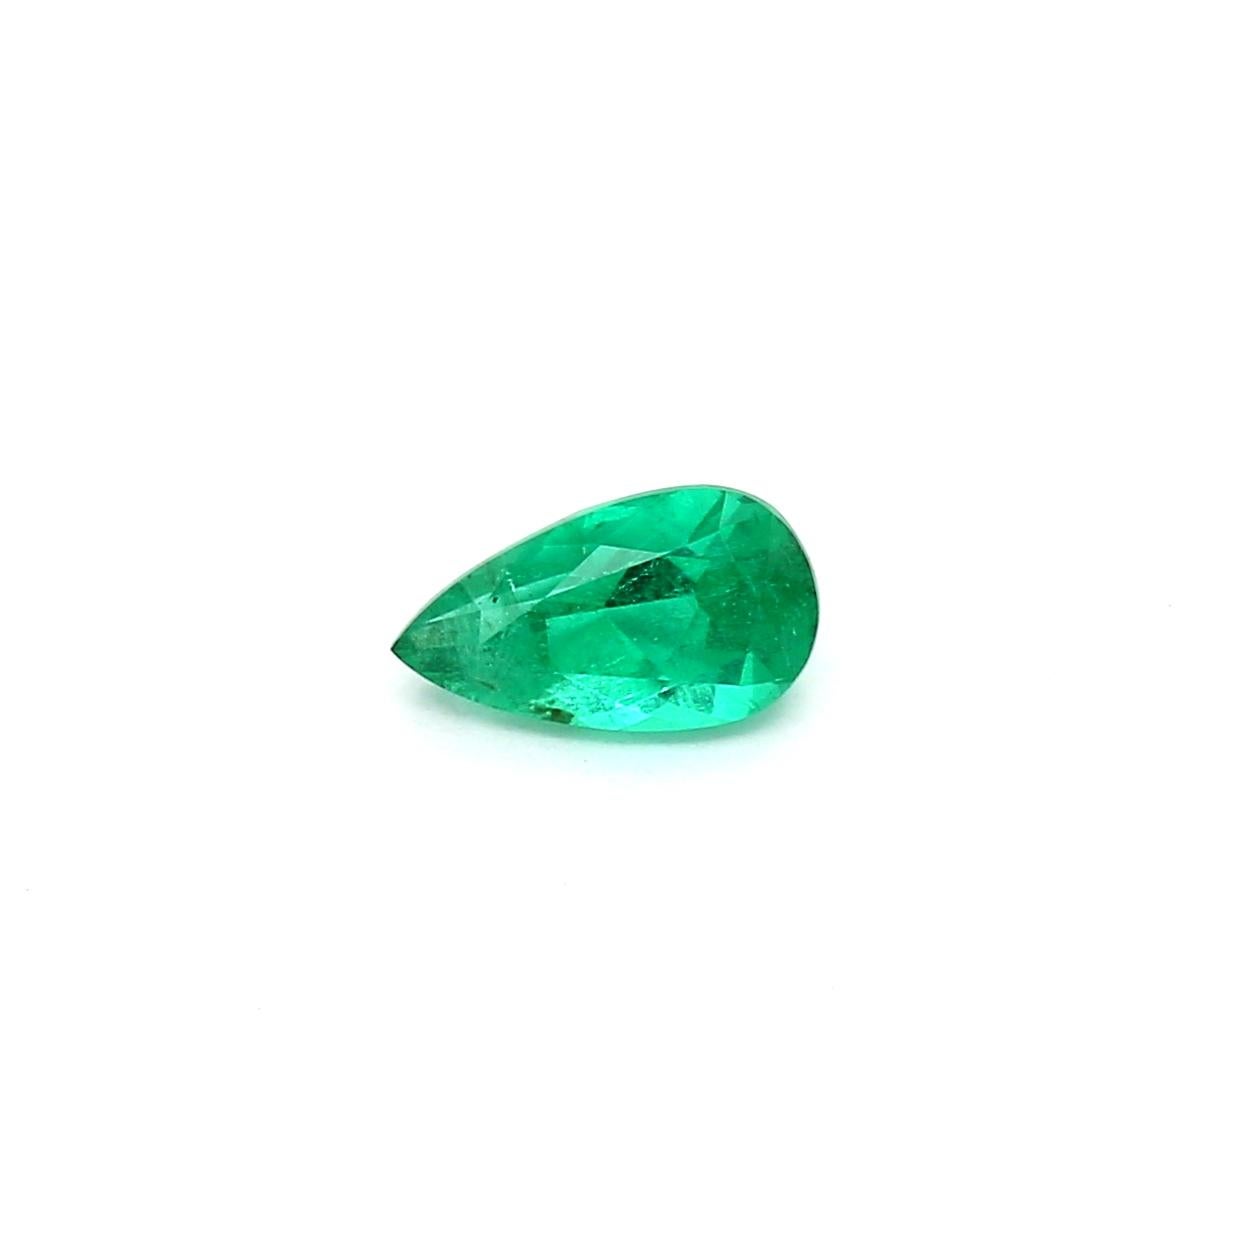 An amazing Russian Emerald which allows jewelers to create a unique piece of wearable art.
This exceptional quality gemstone would make a custom-made jewelry design. Perfect for a Ring or Pendant.

Shape - Pear
Weight - 0.57 ct
Treatment -